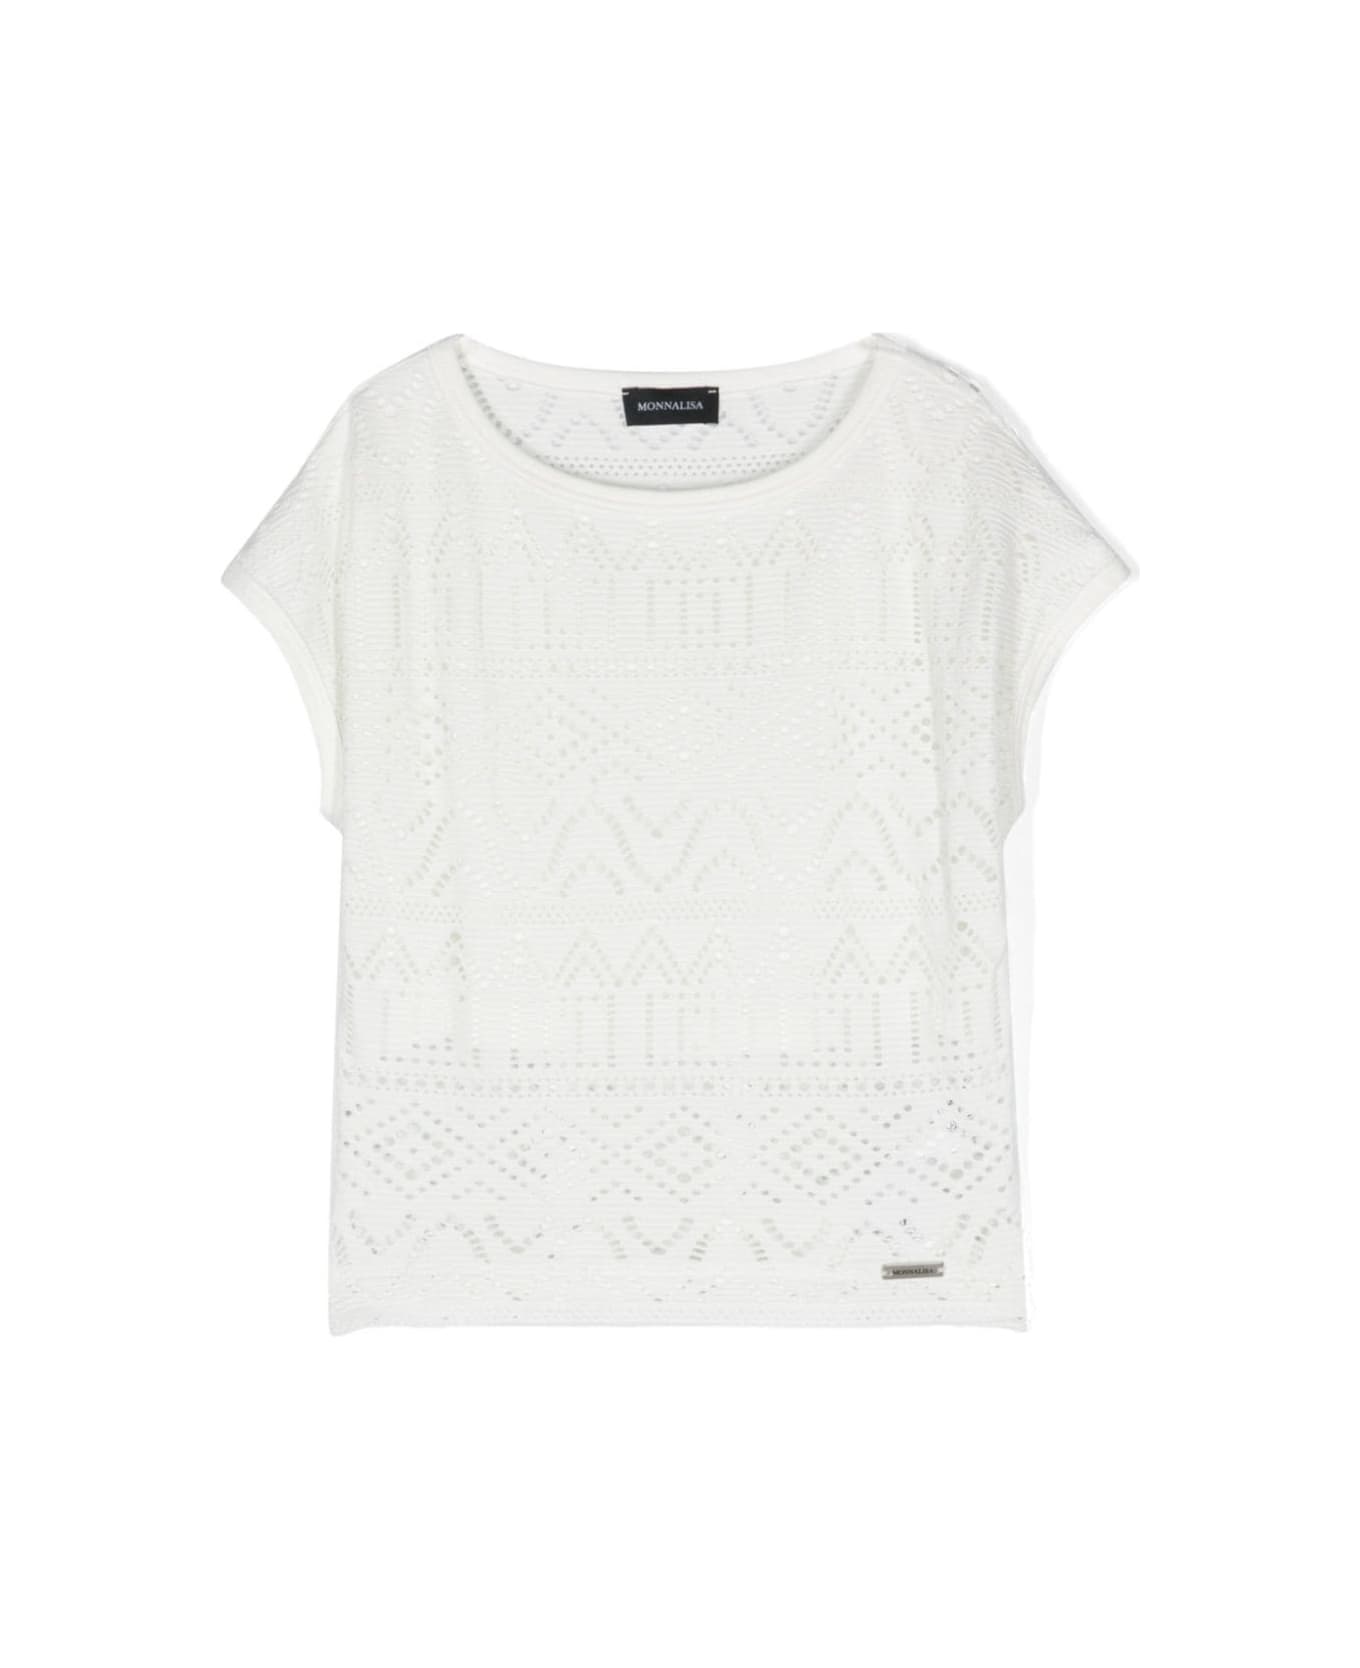 Monnalisa White Short Sleeve Top With Logo Plaque In Lace Girl - White トップス